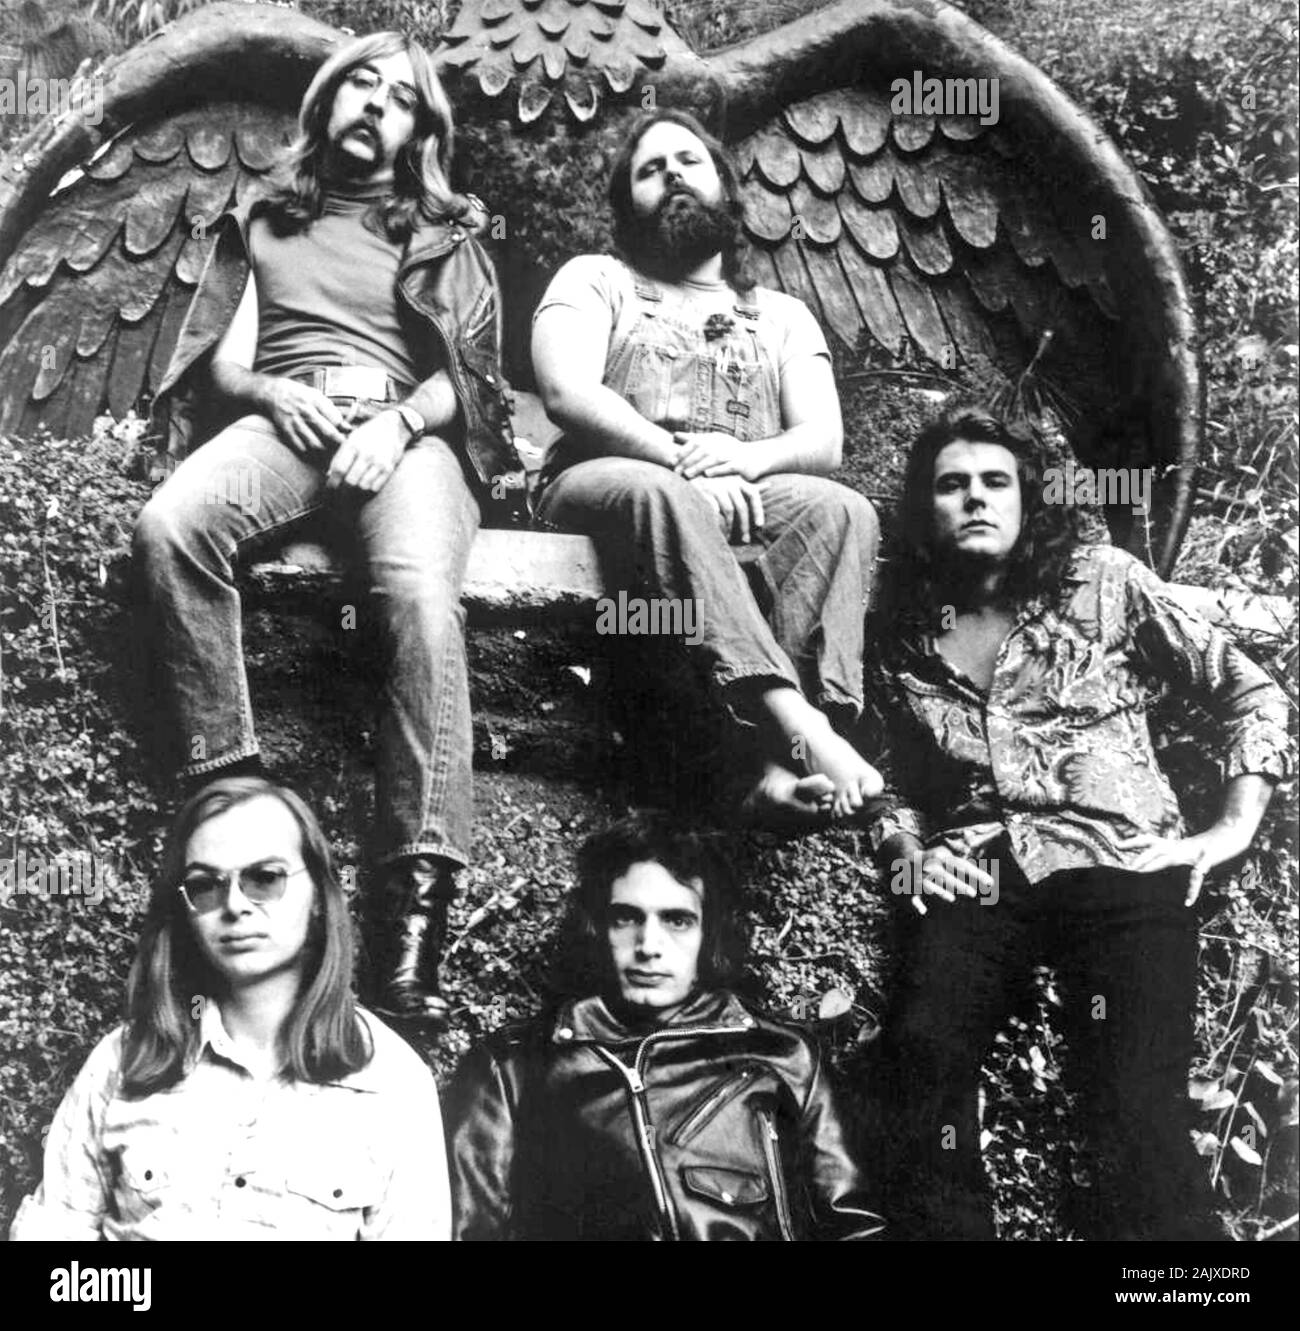 steely-dan-promotional-photo-of-american-rock-group-about-1973-2AJXDRD.jpg